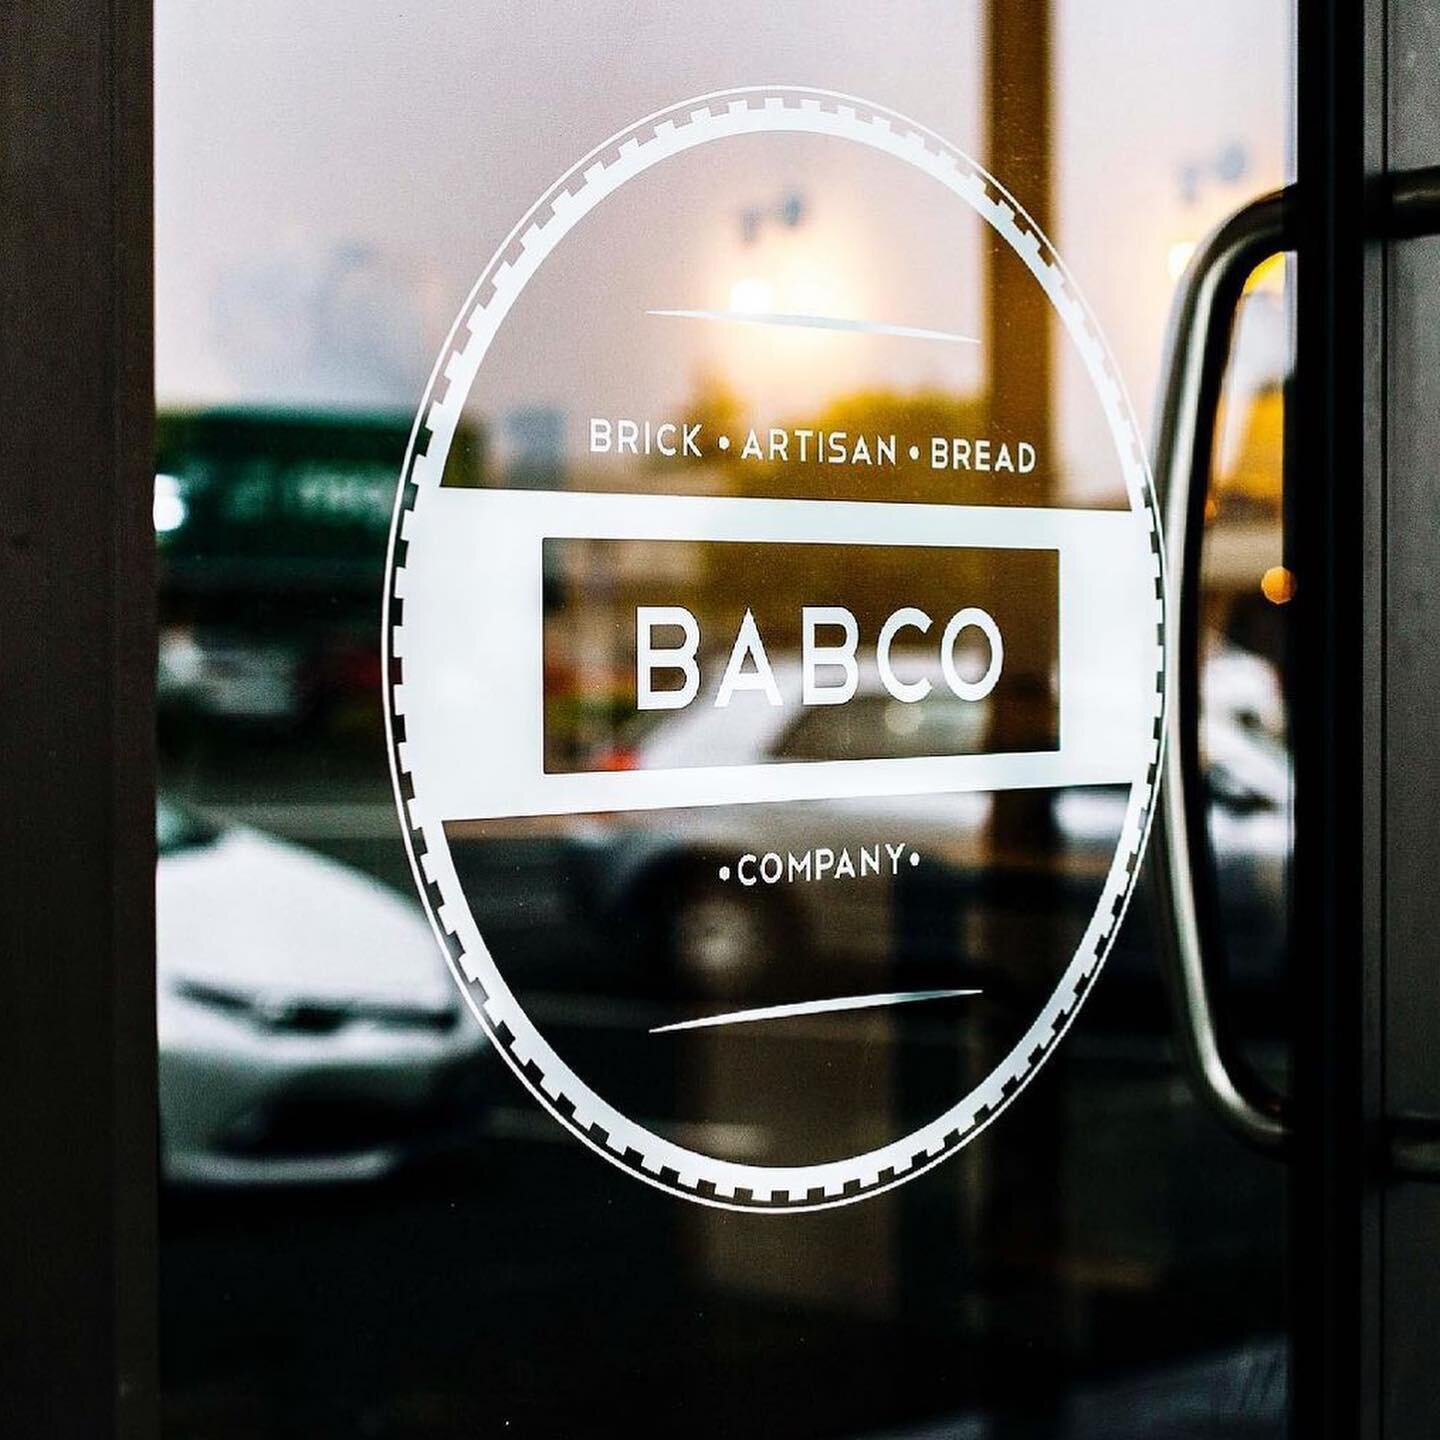 This Wednesday we will be serving up delicious artisan baked goods from @babco_nz 🖤 Our coffee lounge is officially up and running from 9am tomorrow. Head in for a delicious Monday brew! #coffeelounge #babco #thicketstudionz #pahiatua #tararua #lama